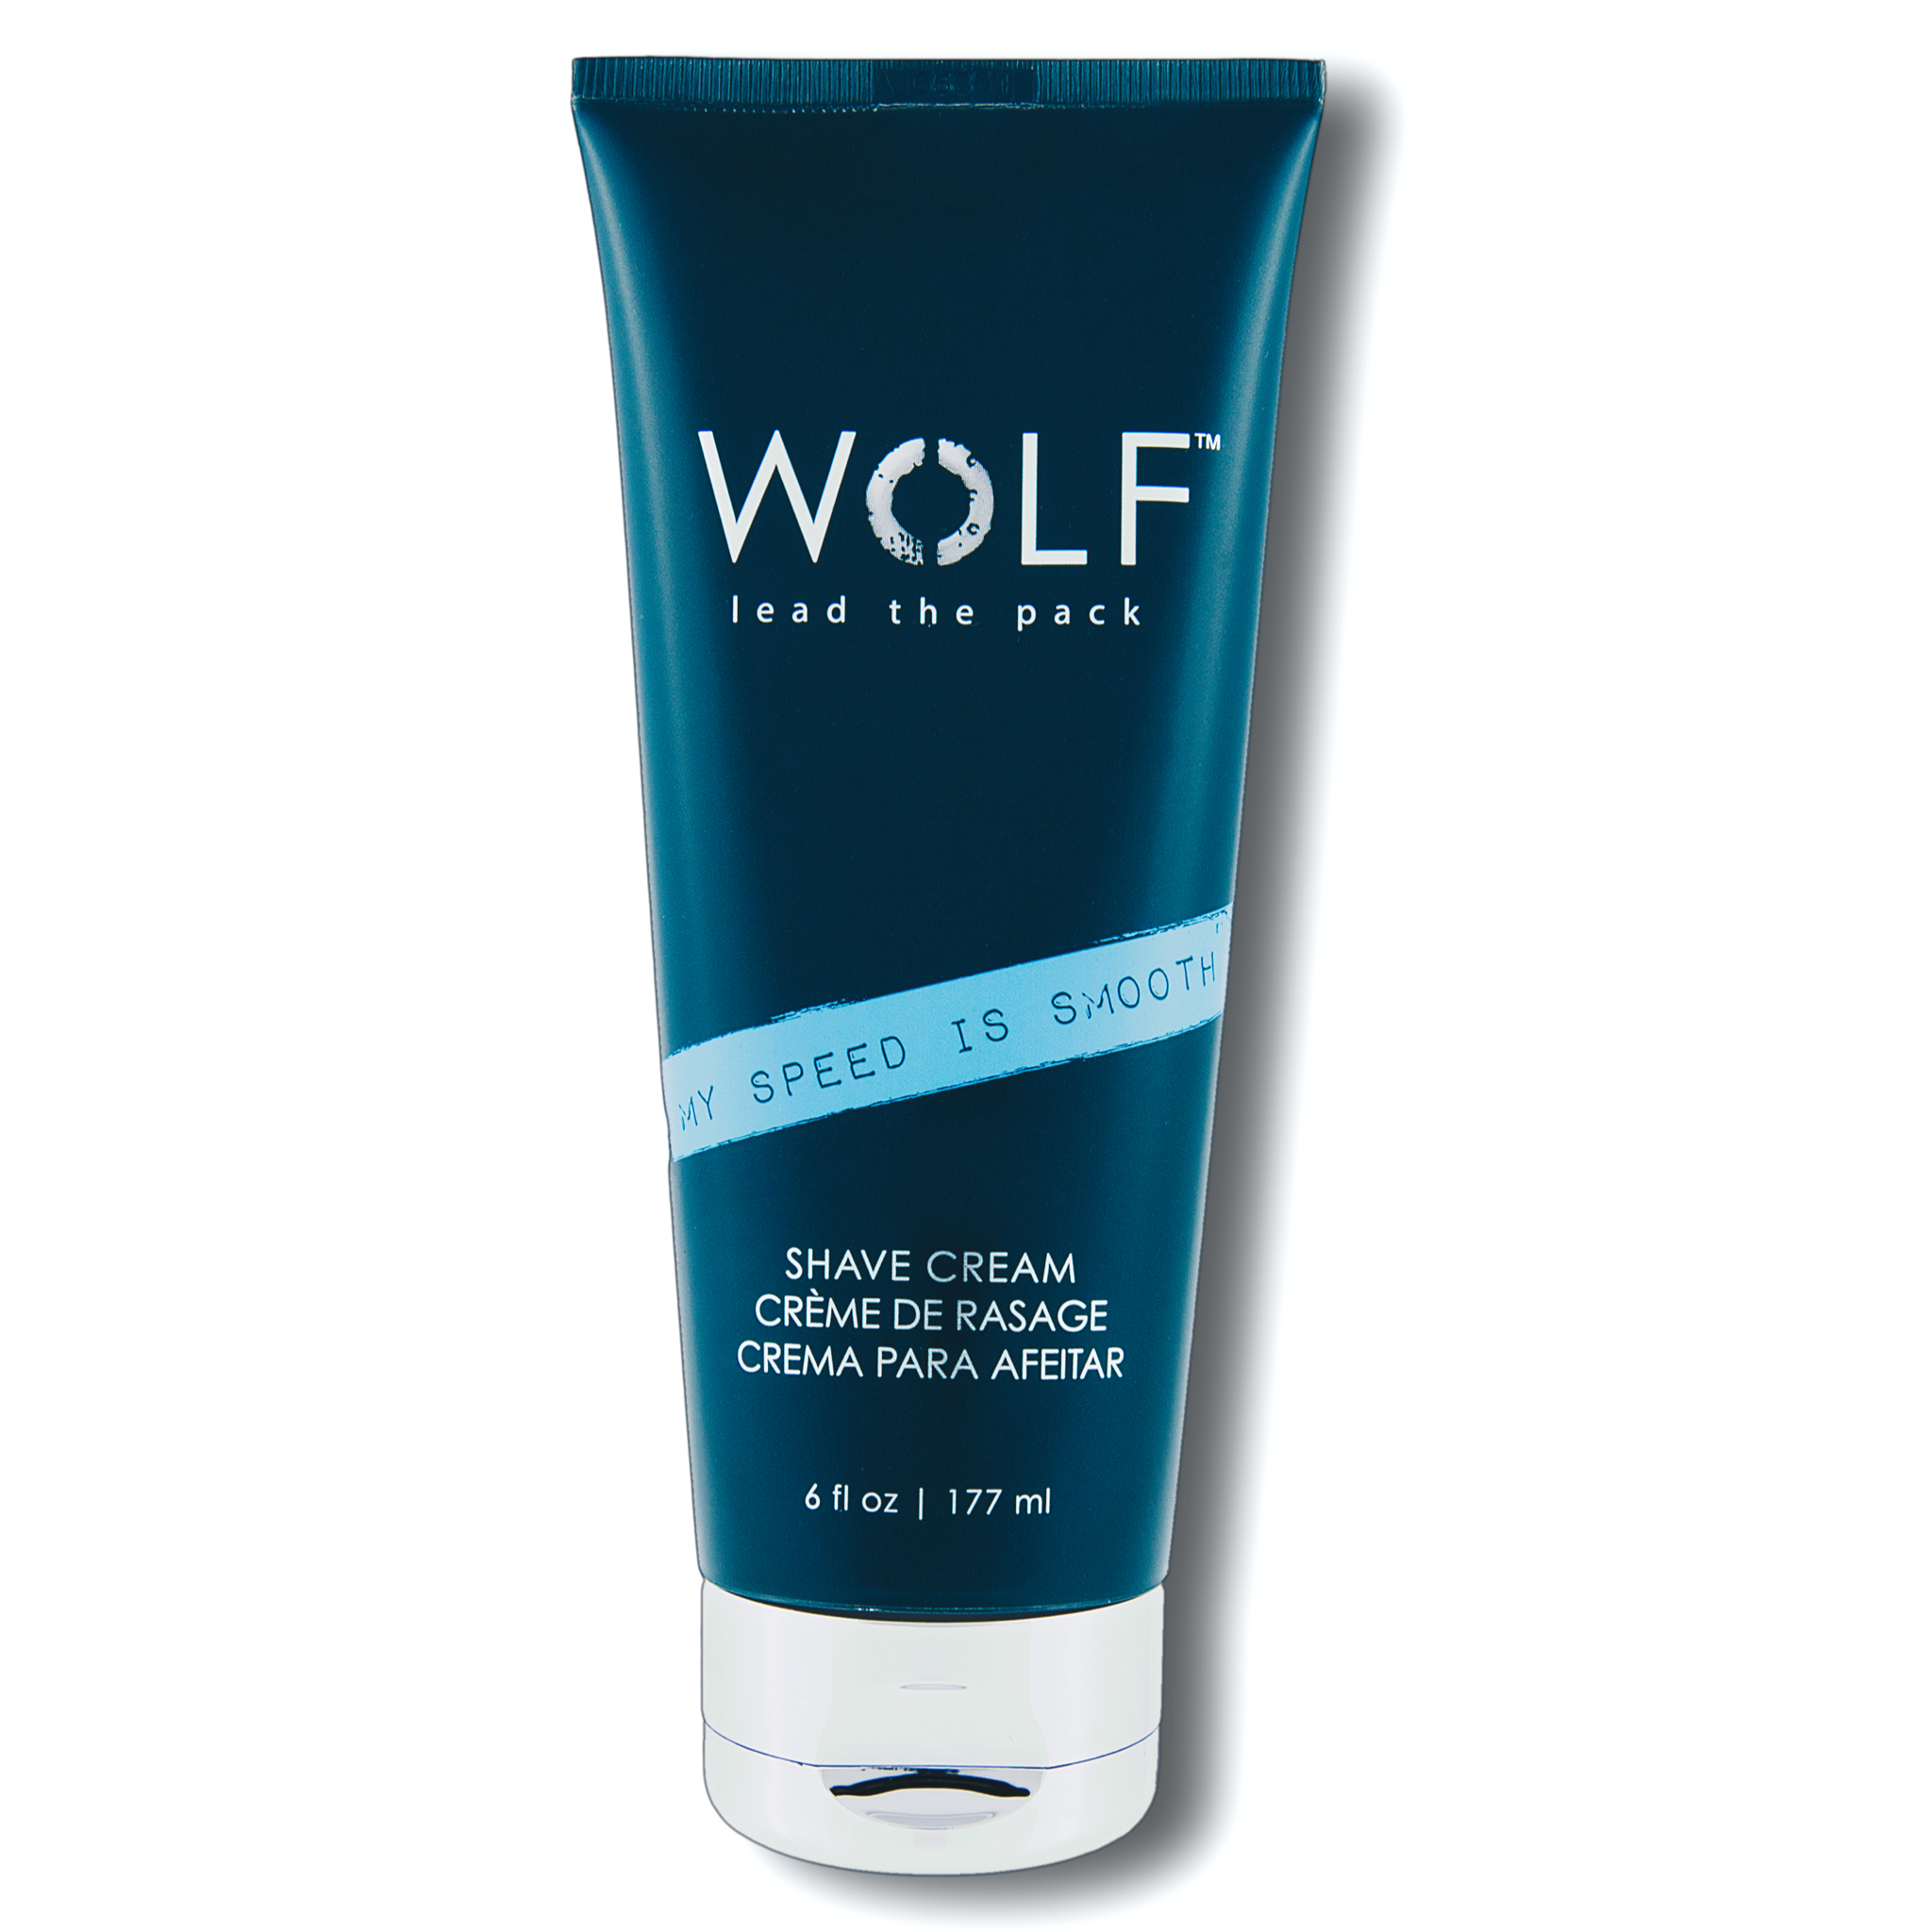 MY SPEED IS SMOOTH Shave Cream, 6 fl oz - Wolf Grooming